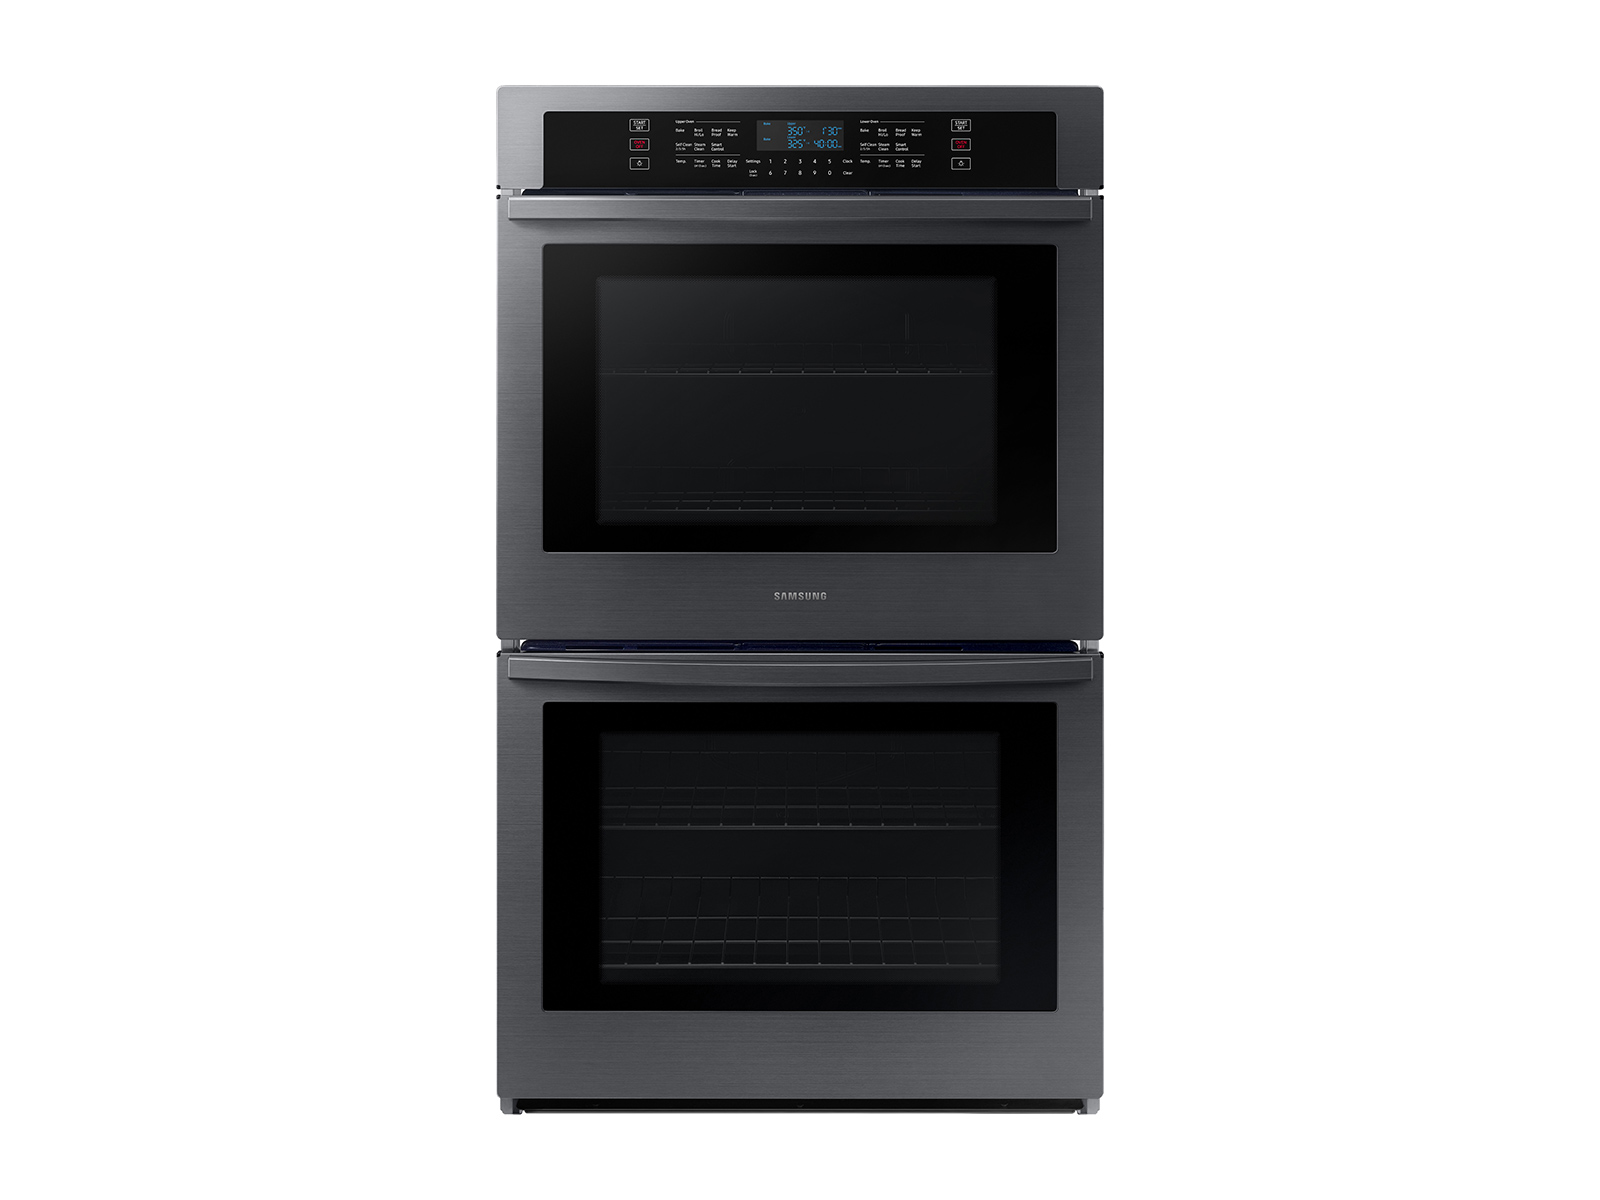 Samsung 30" Smart Double Wall Oven in Black Stainless Steel(NV51T5511DG/AA)